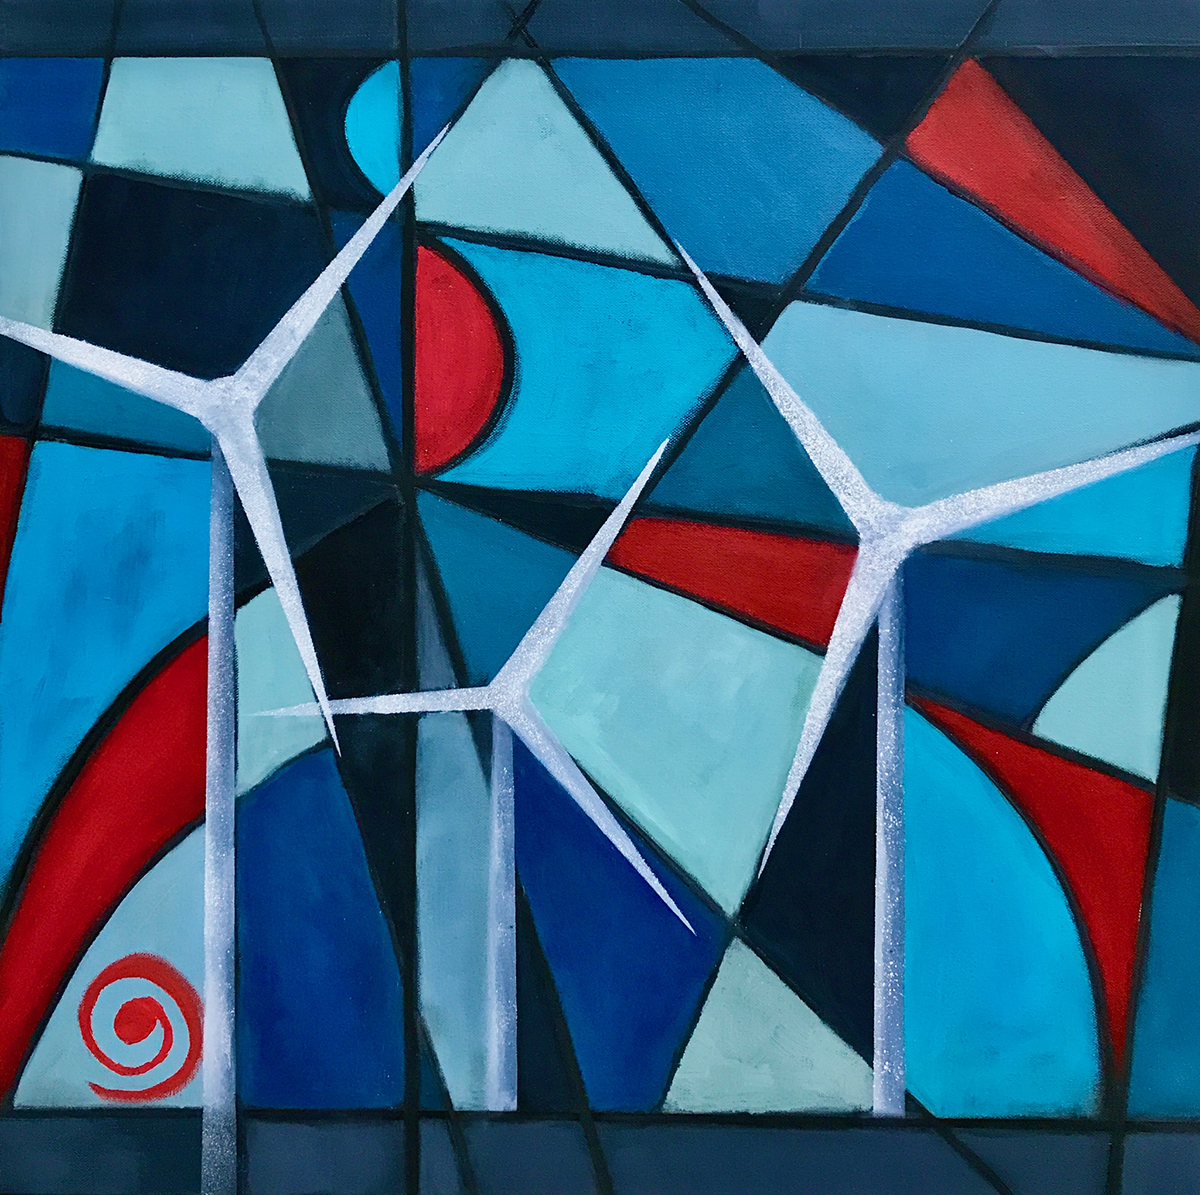 A mosaic style painting in different shades of blue and red